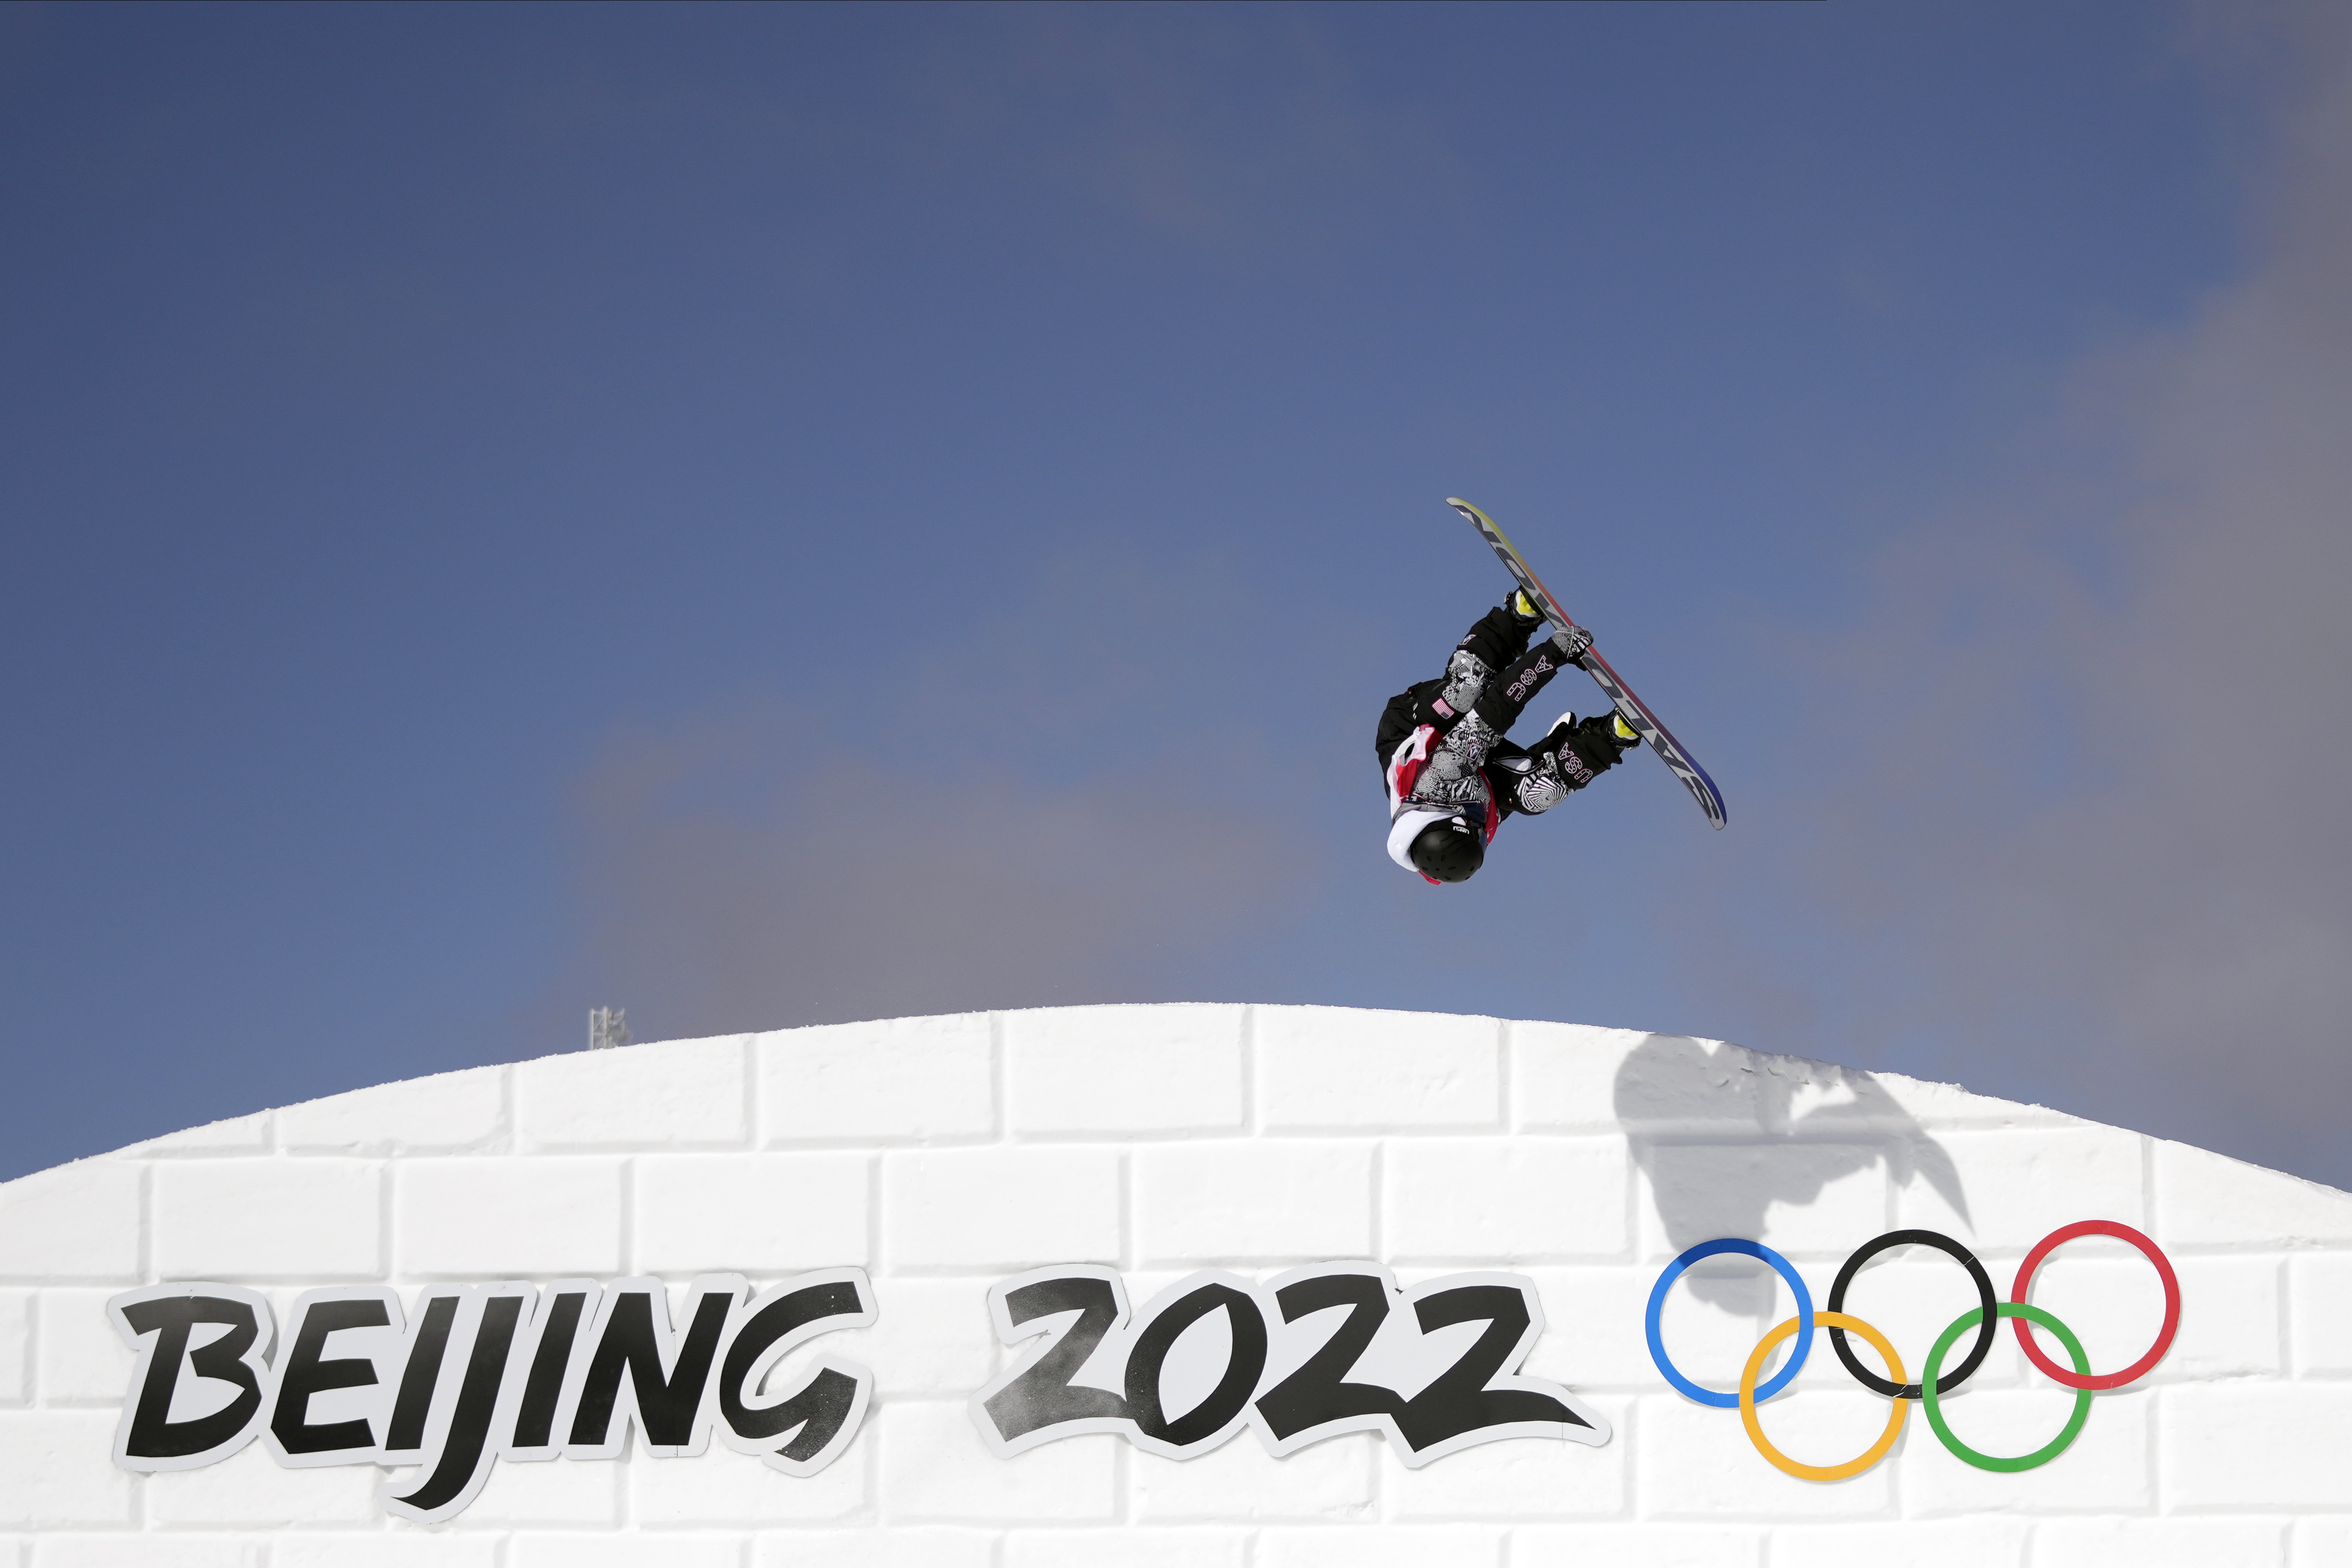 Snowboarding at Winter Olympics 2022 How to watch, schedule of events and more